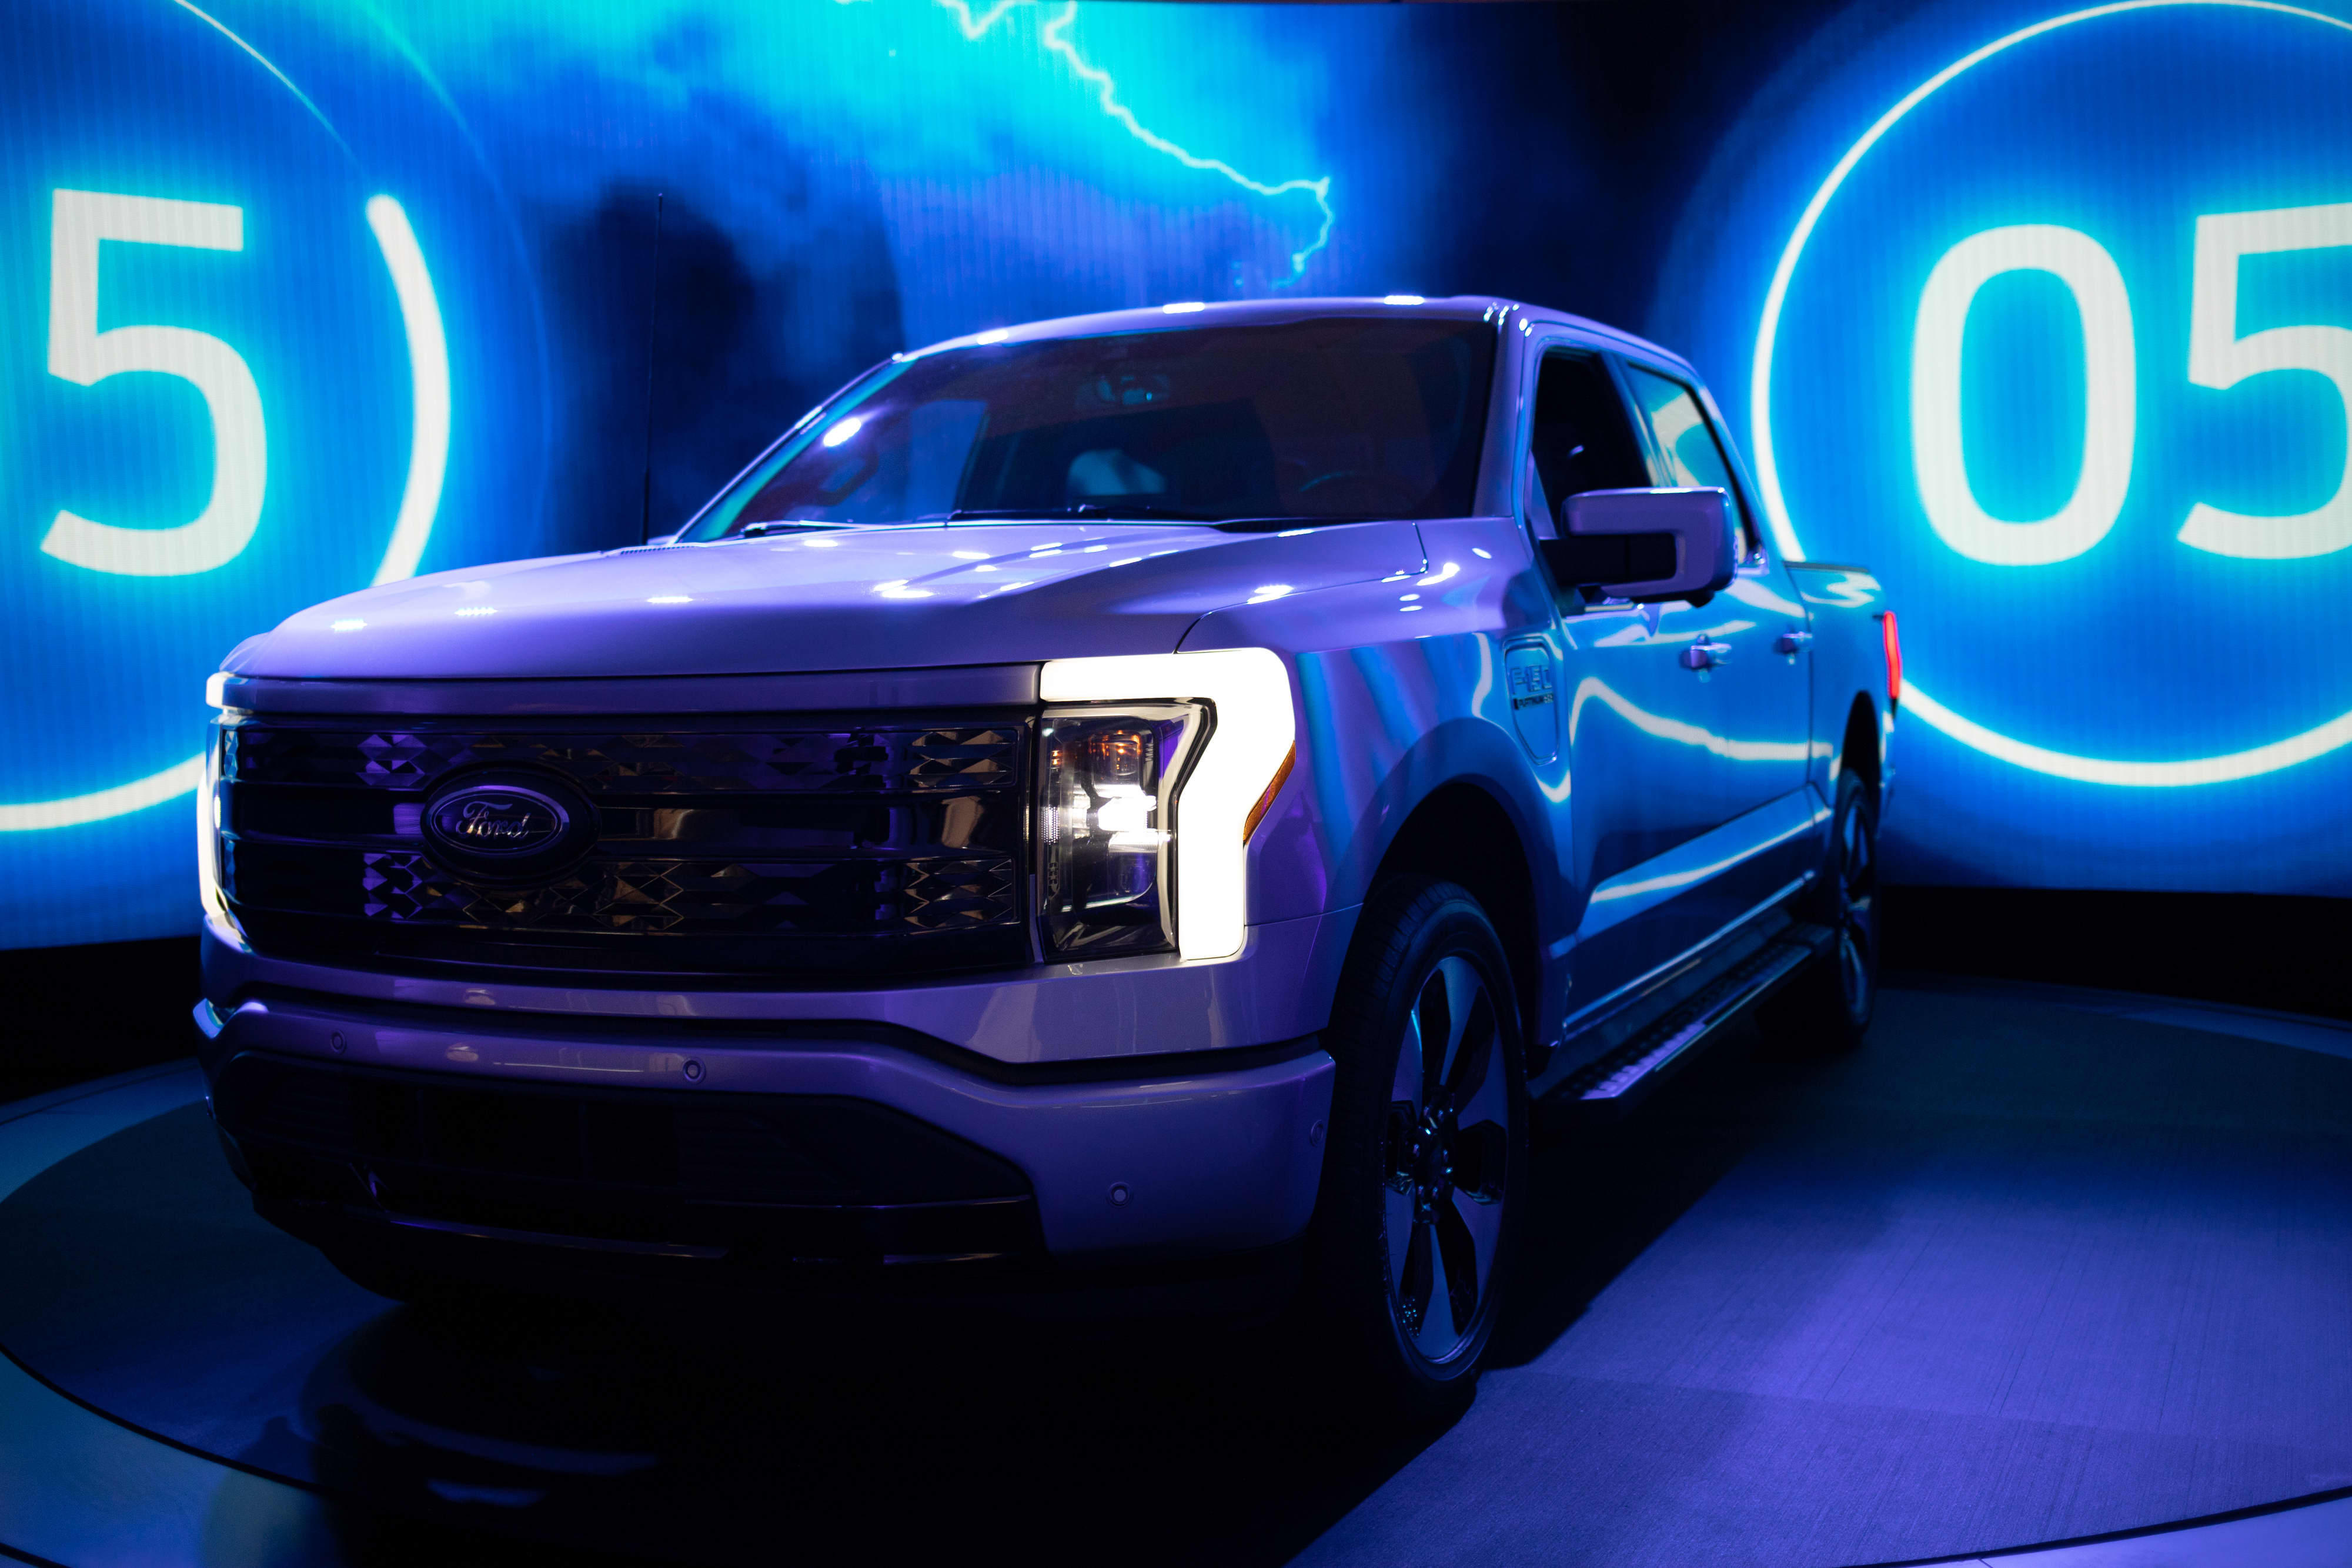 Ford reportedly plans to increase power consumption by up to $ 20 billion